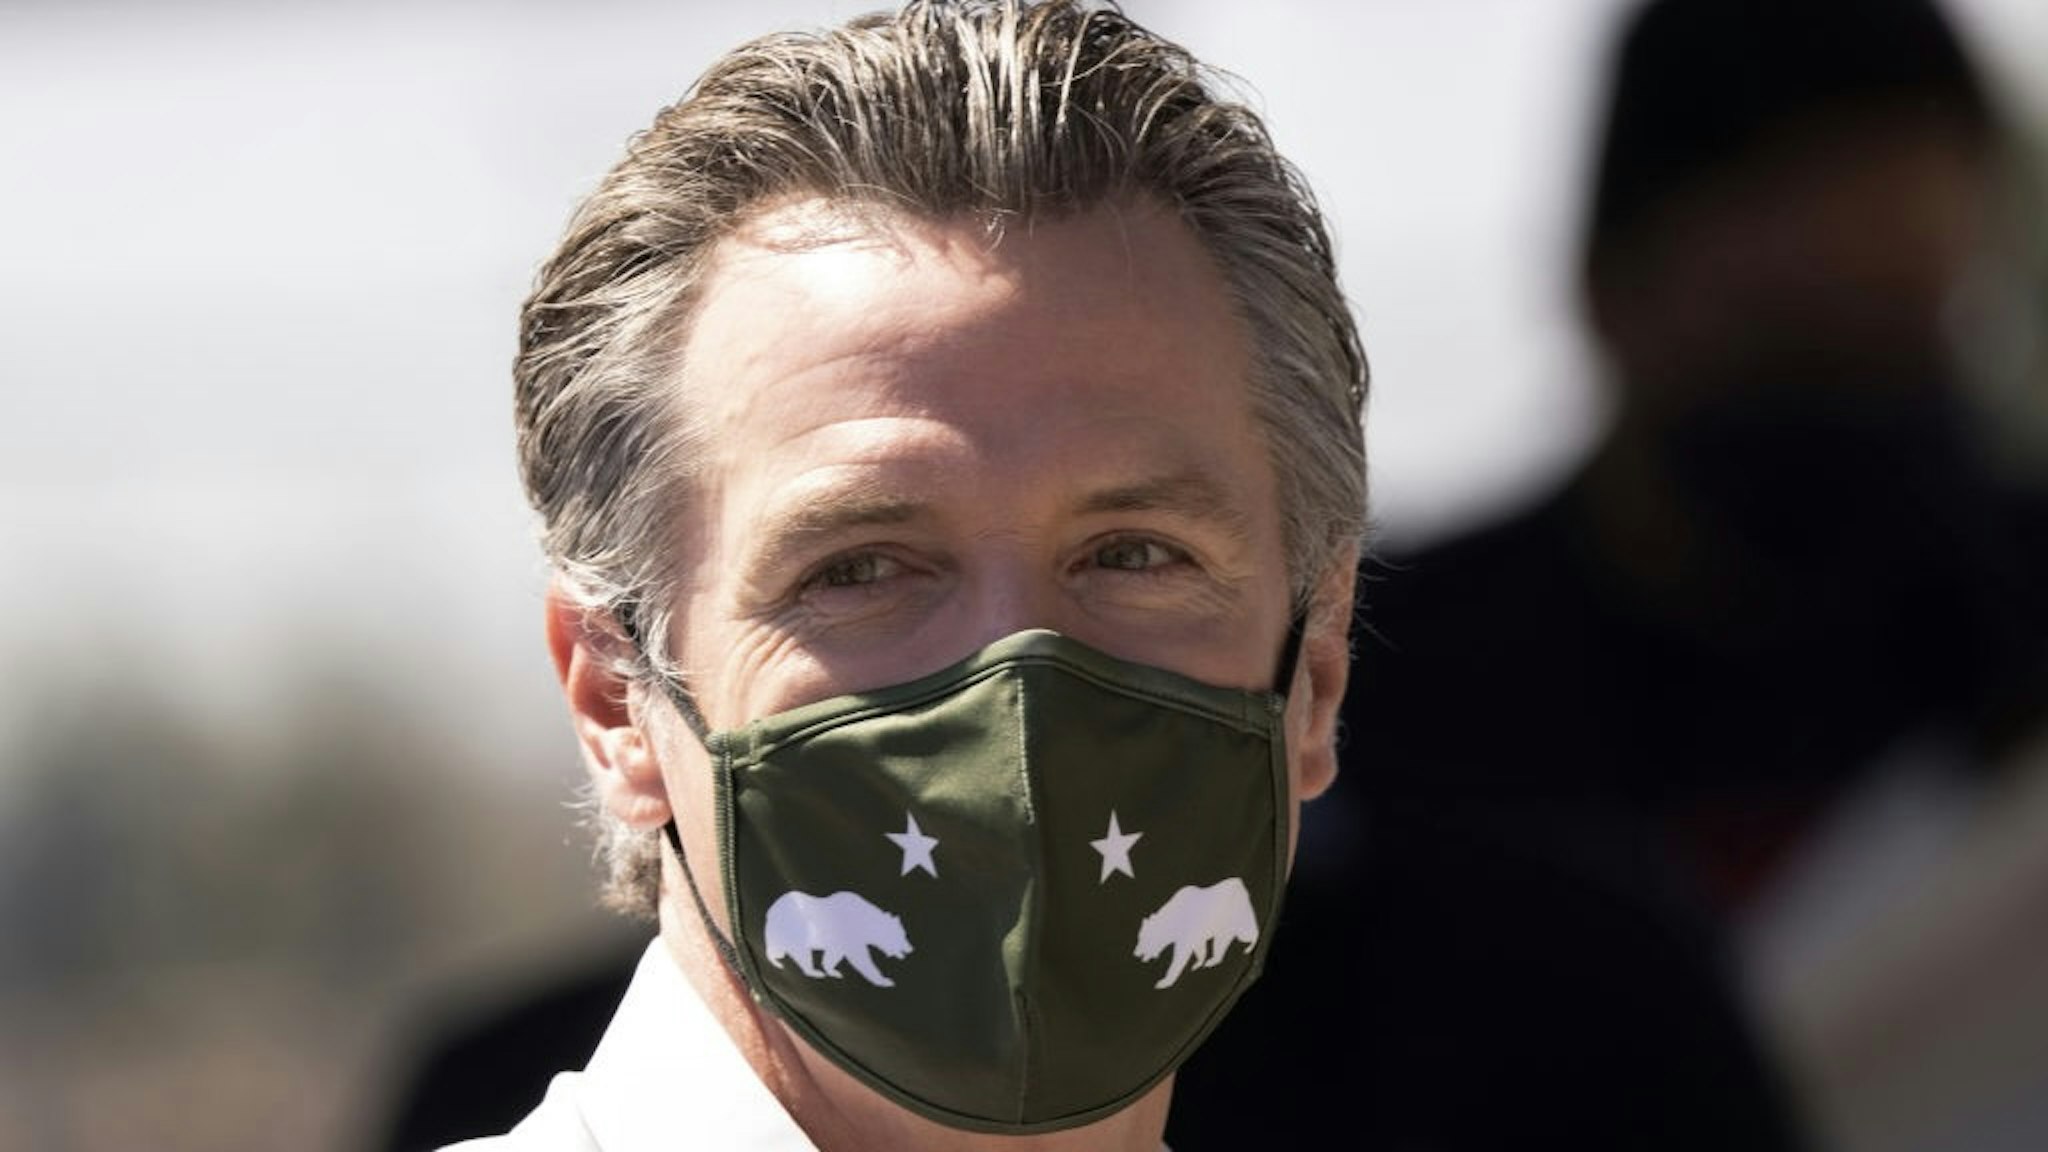 California Governor Newsom Campaigns With Sen. Elizabeth Warren In Culver City CULVER CITY, CA - SEPTEMBER 04: Gov. Gavin Newsom wears a California state themed face mask at a "Stop the Republican Recall" rally as he campaigns with Sen. Elizabeth Warren, D-Massachusetts, at Culver City High School on September 4, 2021 in Culver City, California. Forty-six candidates, mostly Republicans, are running to overthrow the governor in this years special recall election on September 14, ahead of next years regularly scheduled gubernatorial vote. (Photo by David McNew/Getty Images) David McNew / Stringer